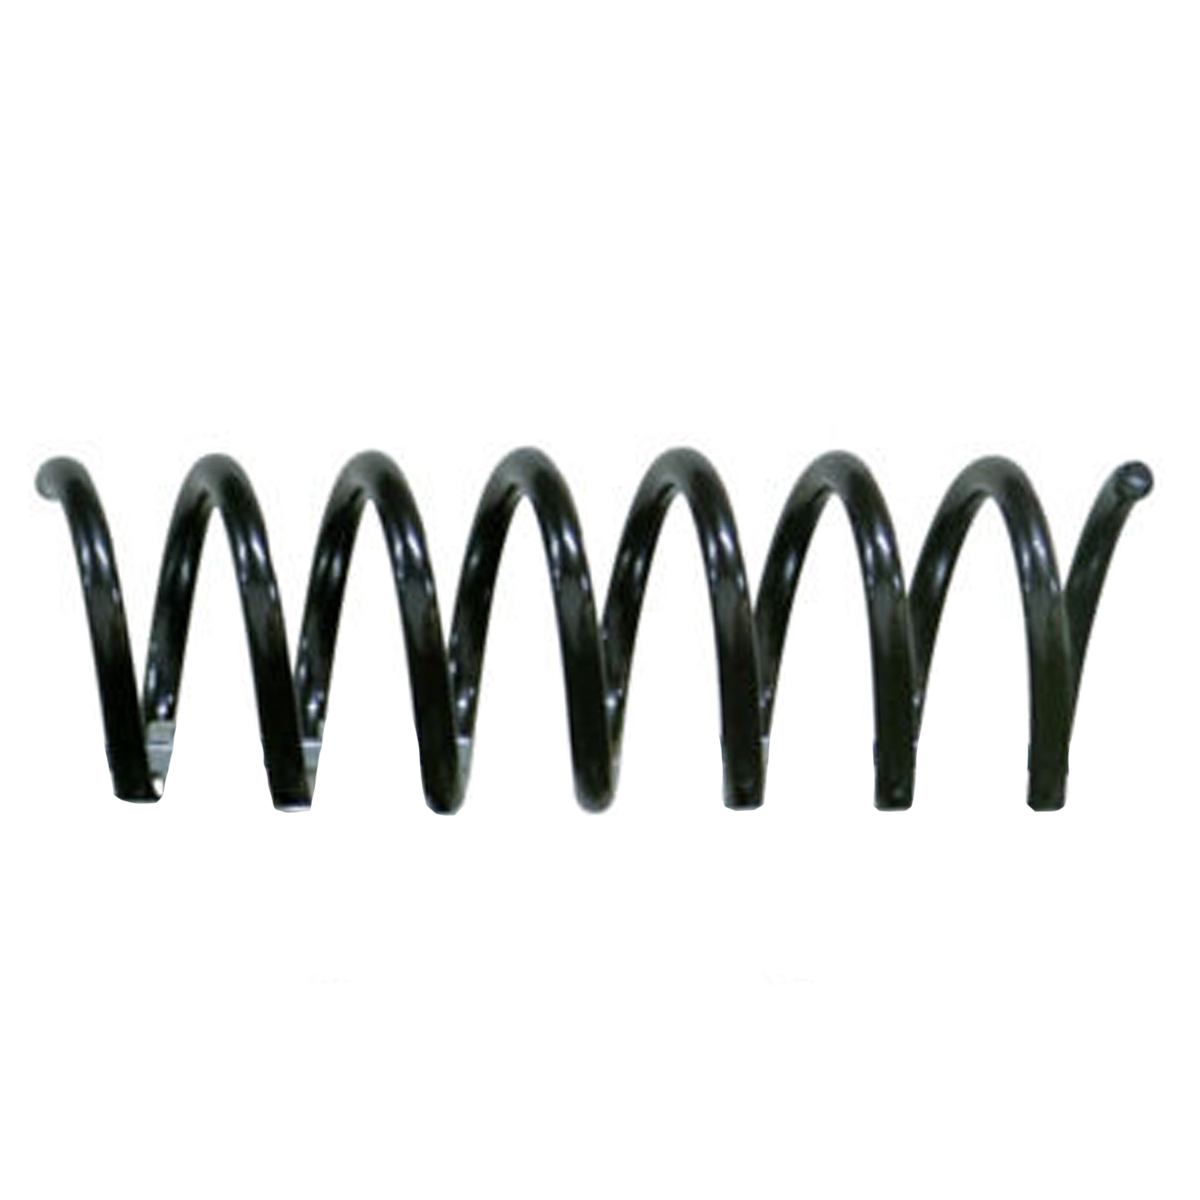 Replacement spring for cattle brush